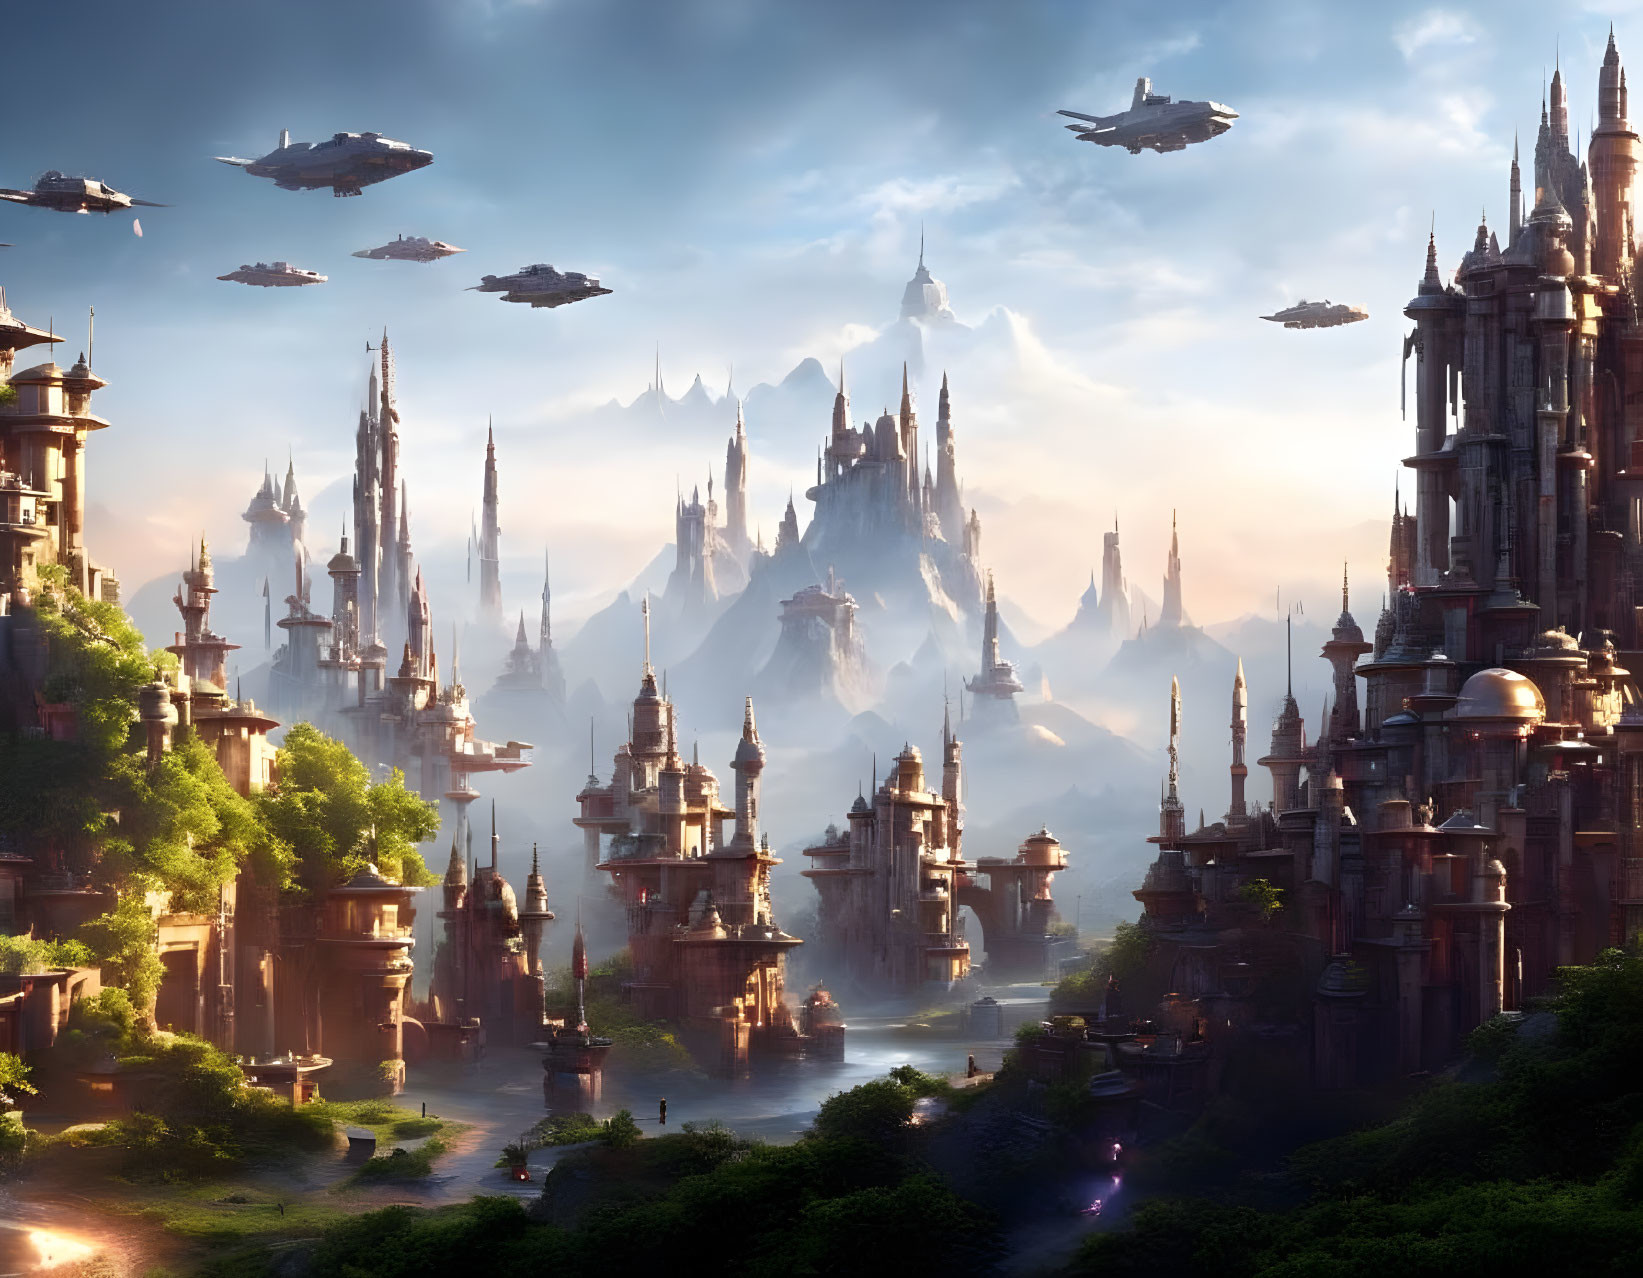 Fantastical city with towering spires in mountainous backdrop.